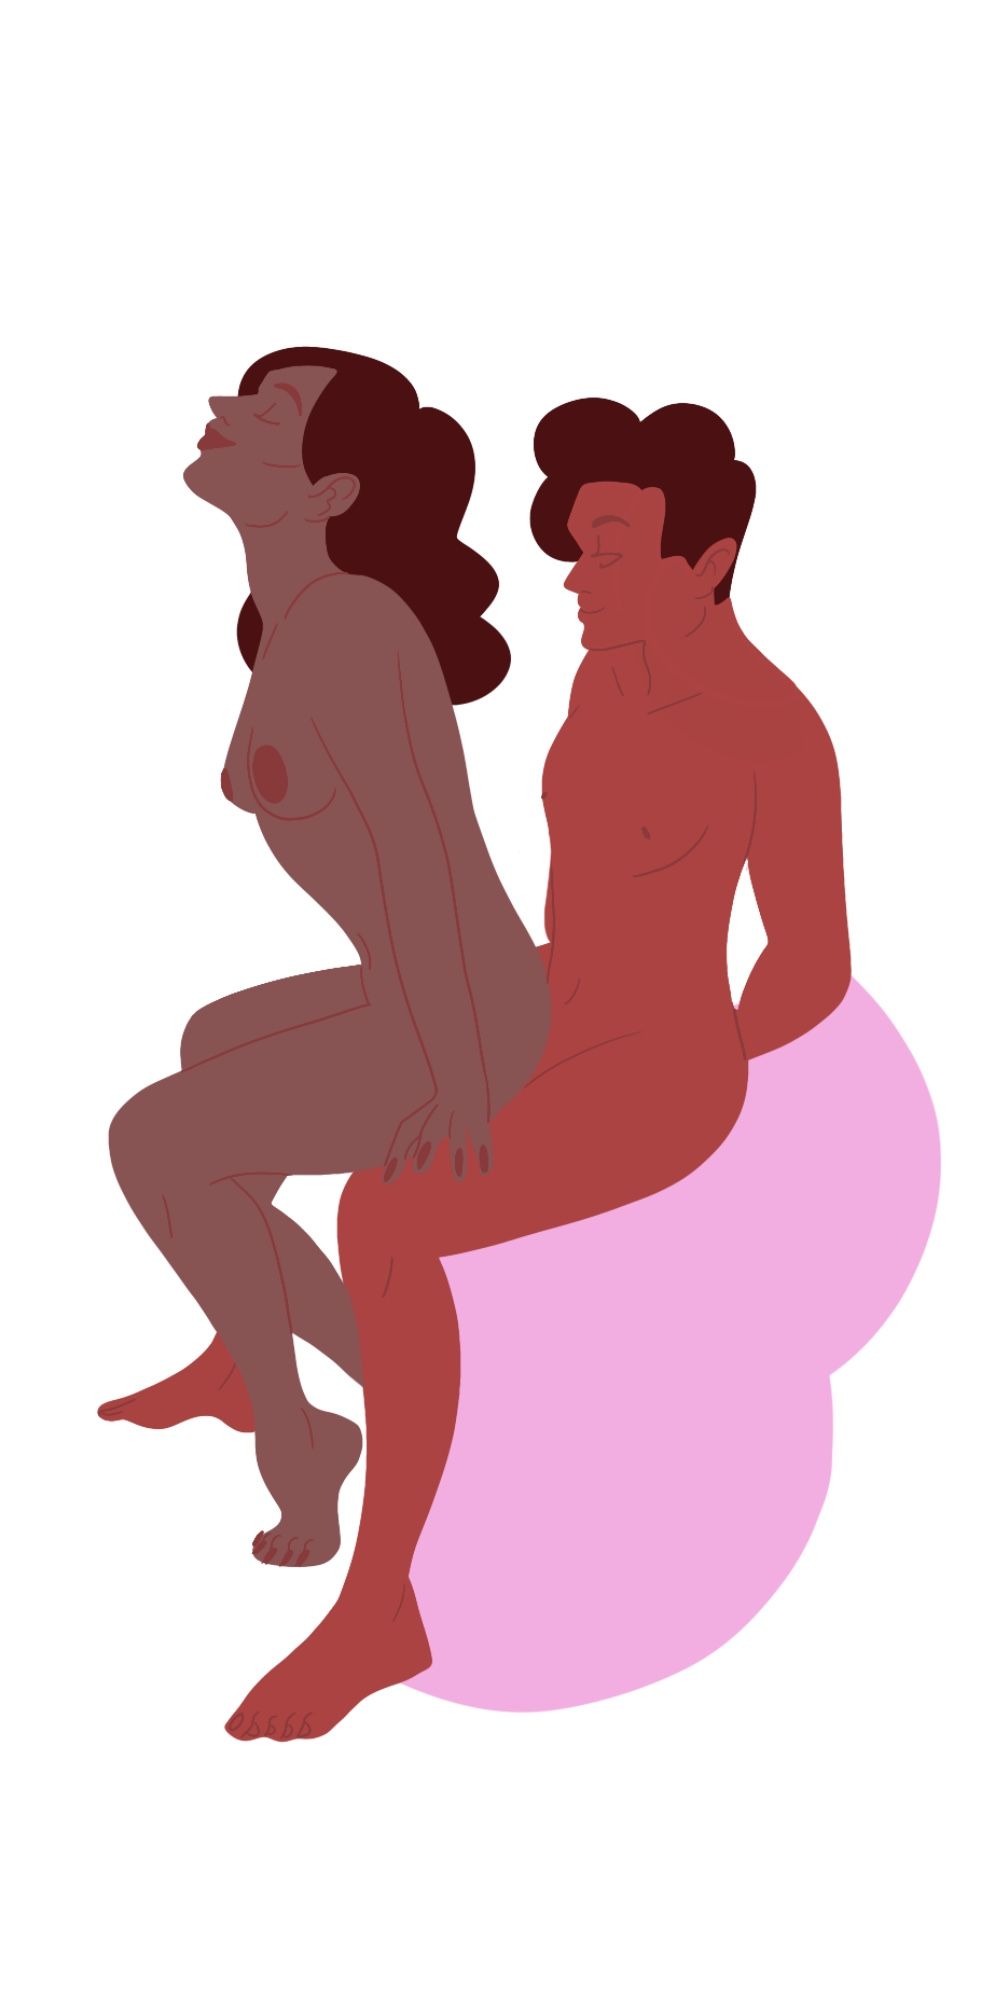 11 Steamy Hotel Sex Positions image image